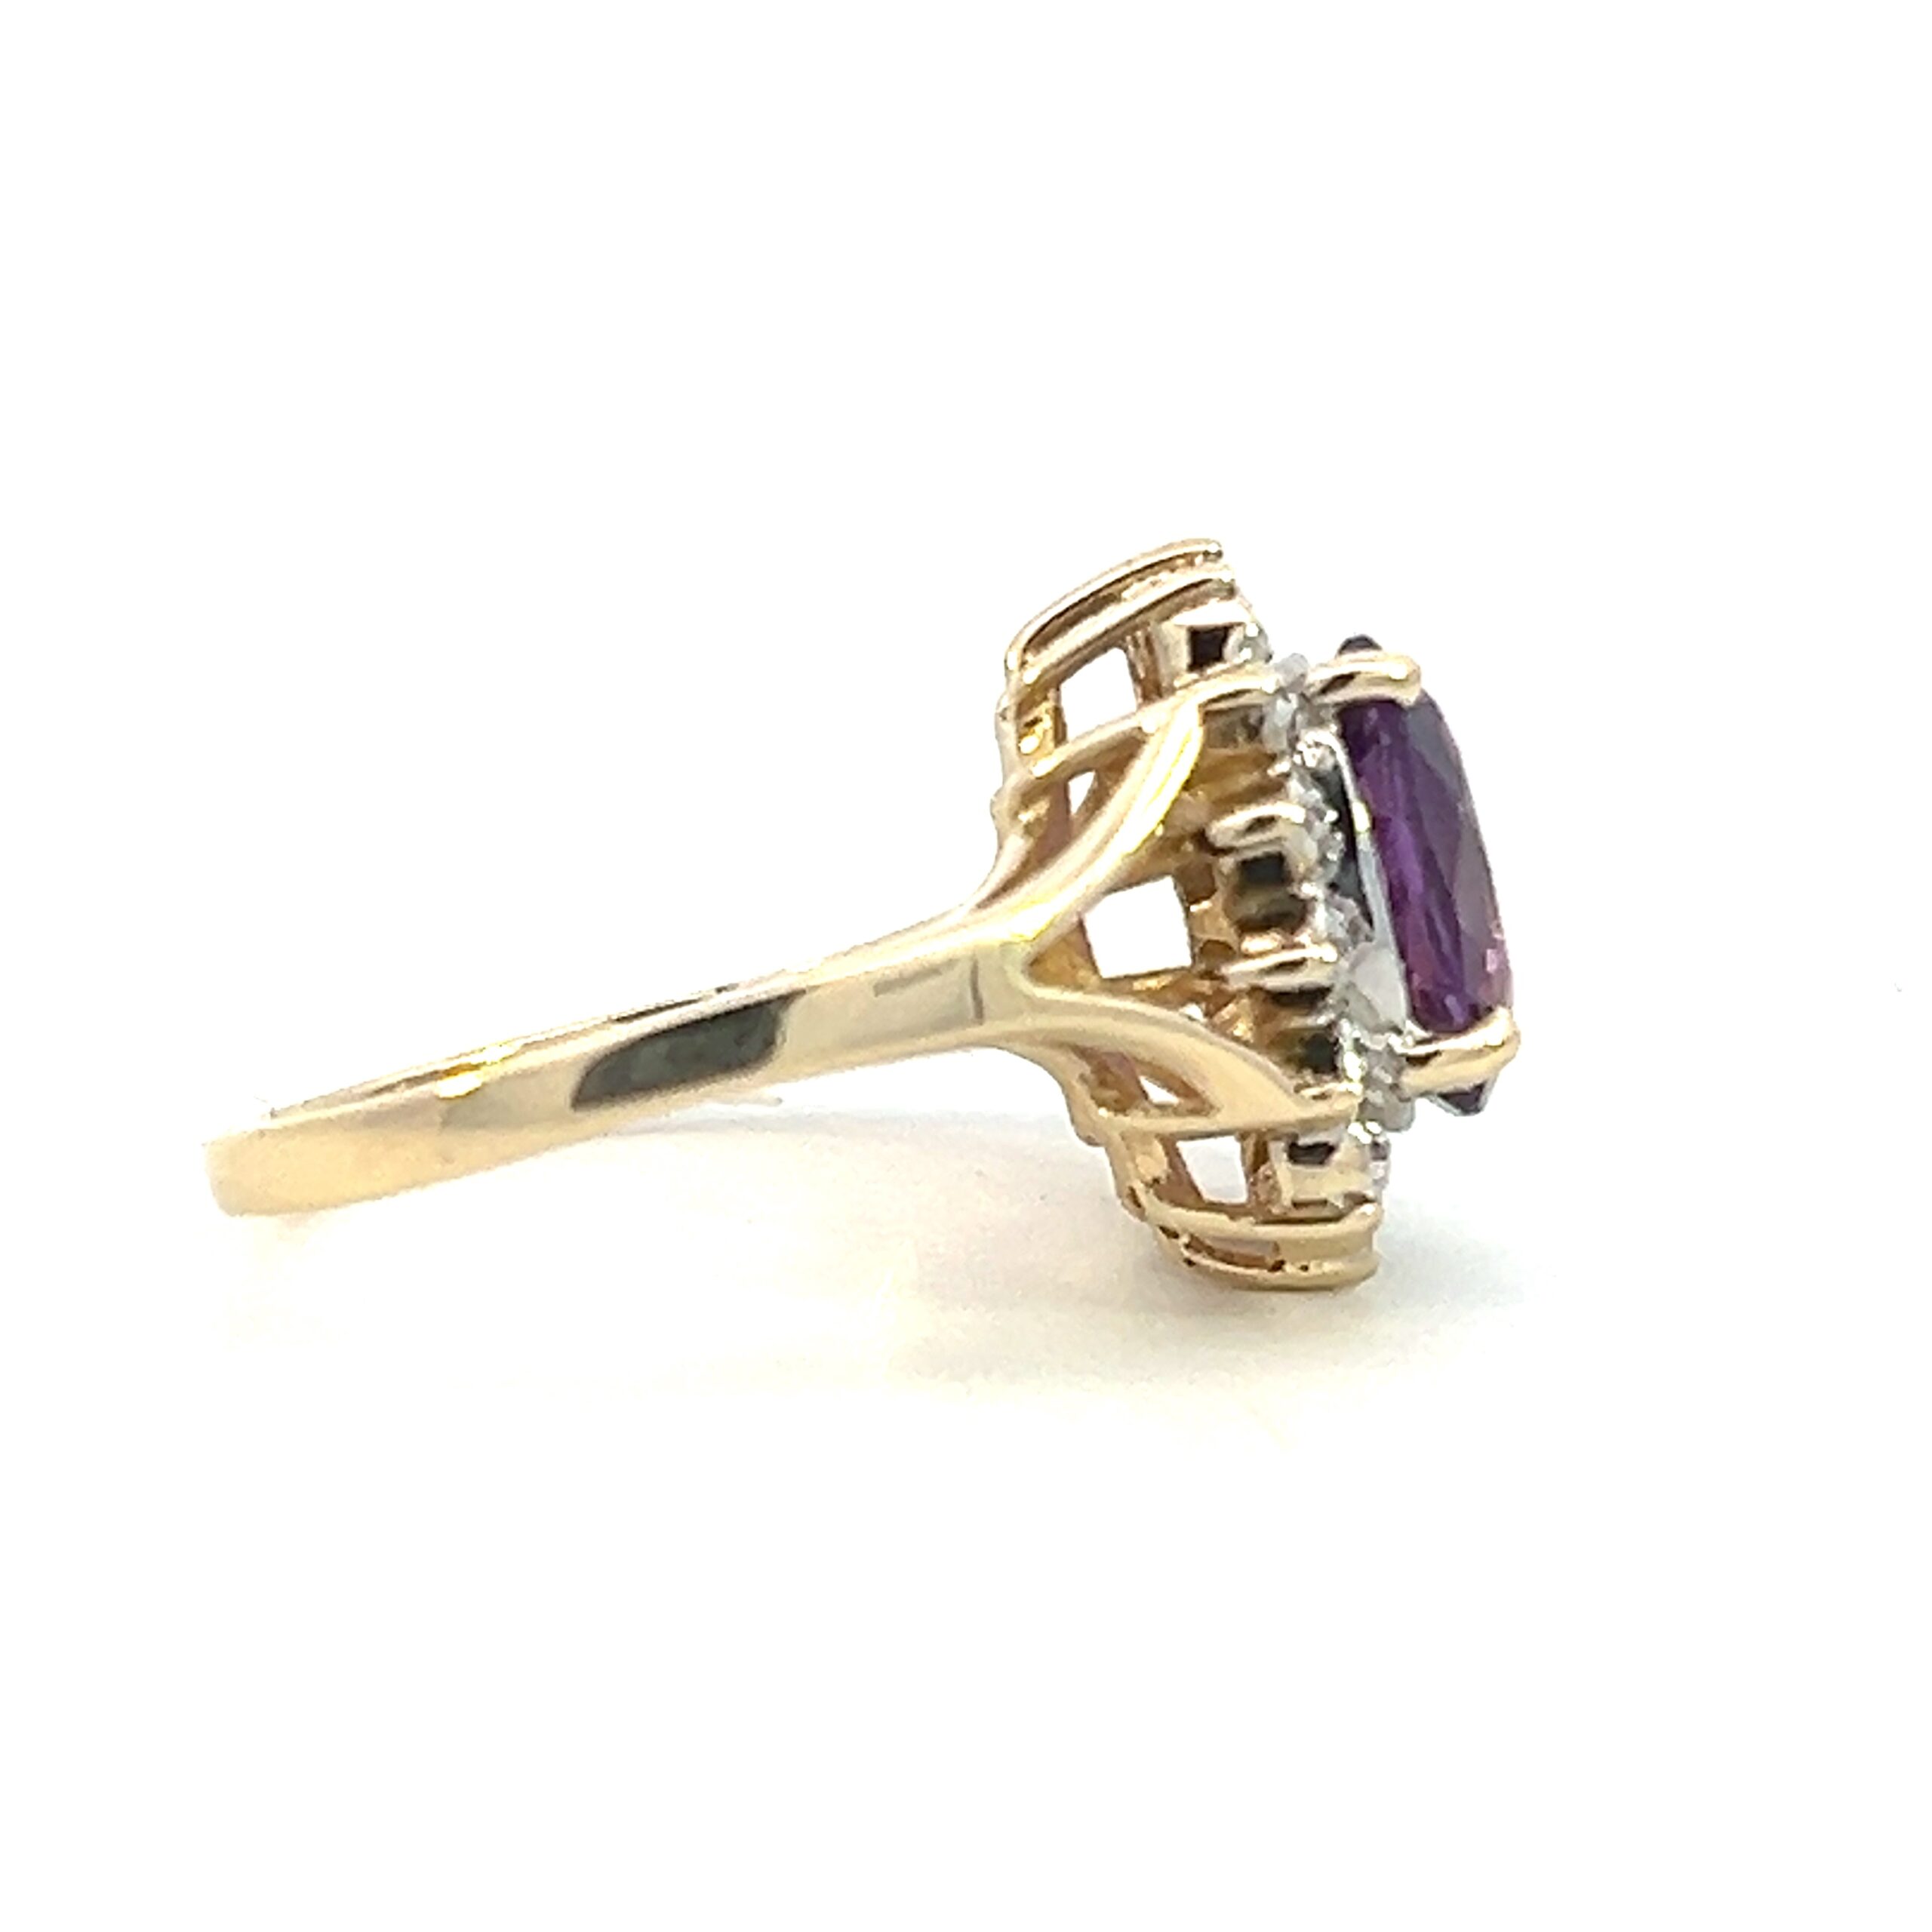 One estate 14 karat yellow and white gold amethyst and diamond halo ring containing an oval amethyst measuring 10x8mm and containing 14 round brilliant diamonds in a scalloped halo. The ring is primarily crafted from yellow gold with the diamond set in white gold. The shoulders feature a split-shank design. Vintage from the 1970s.